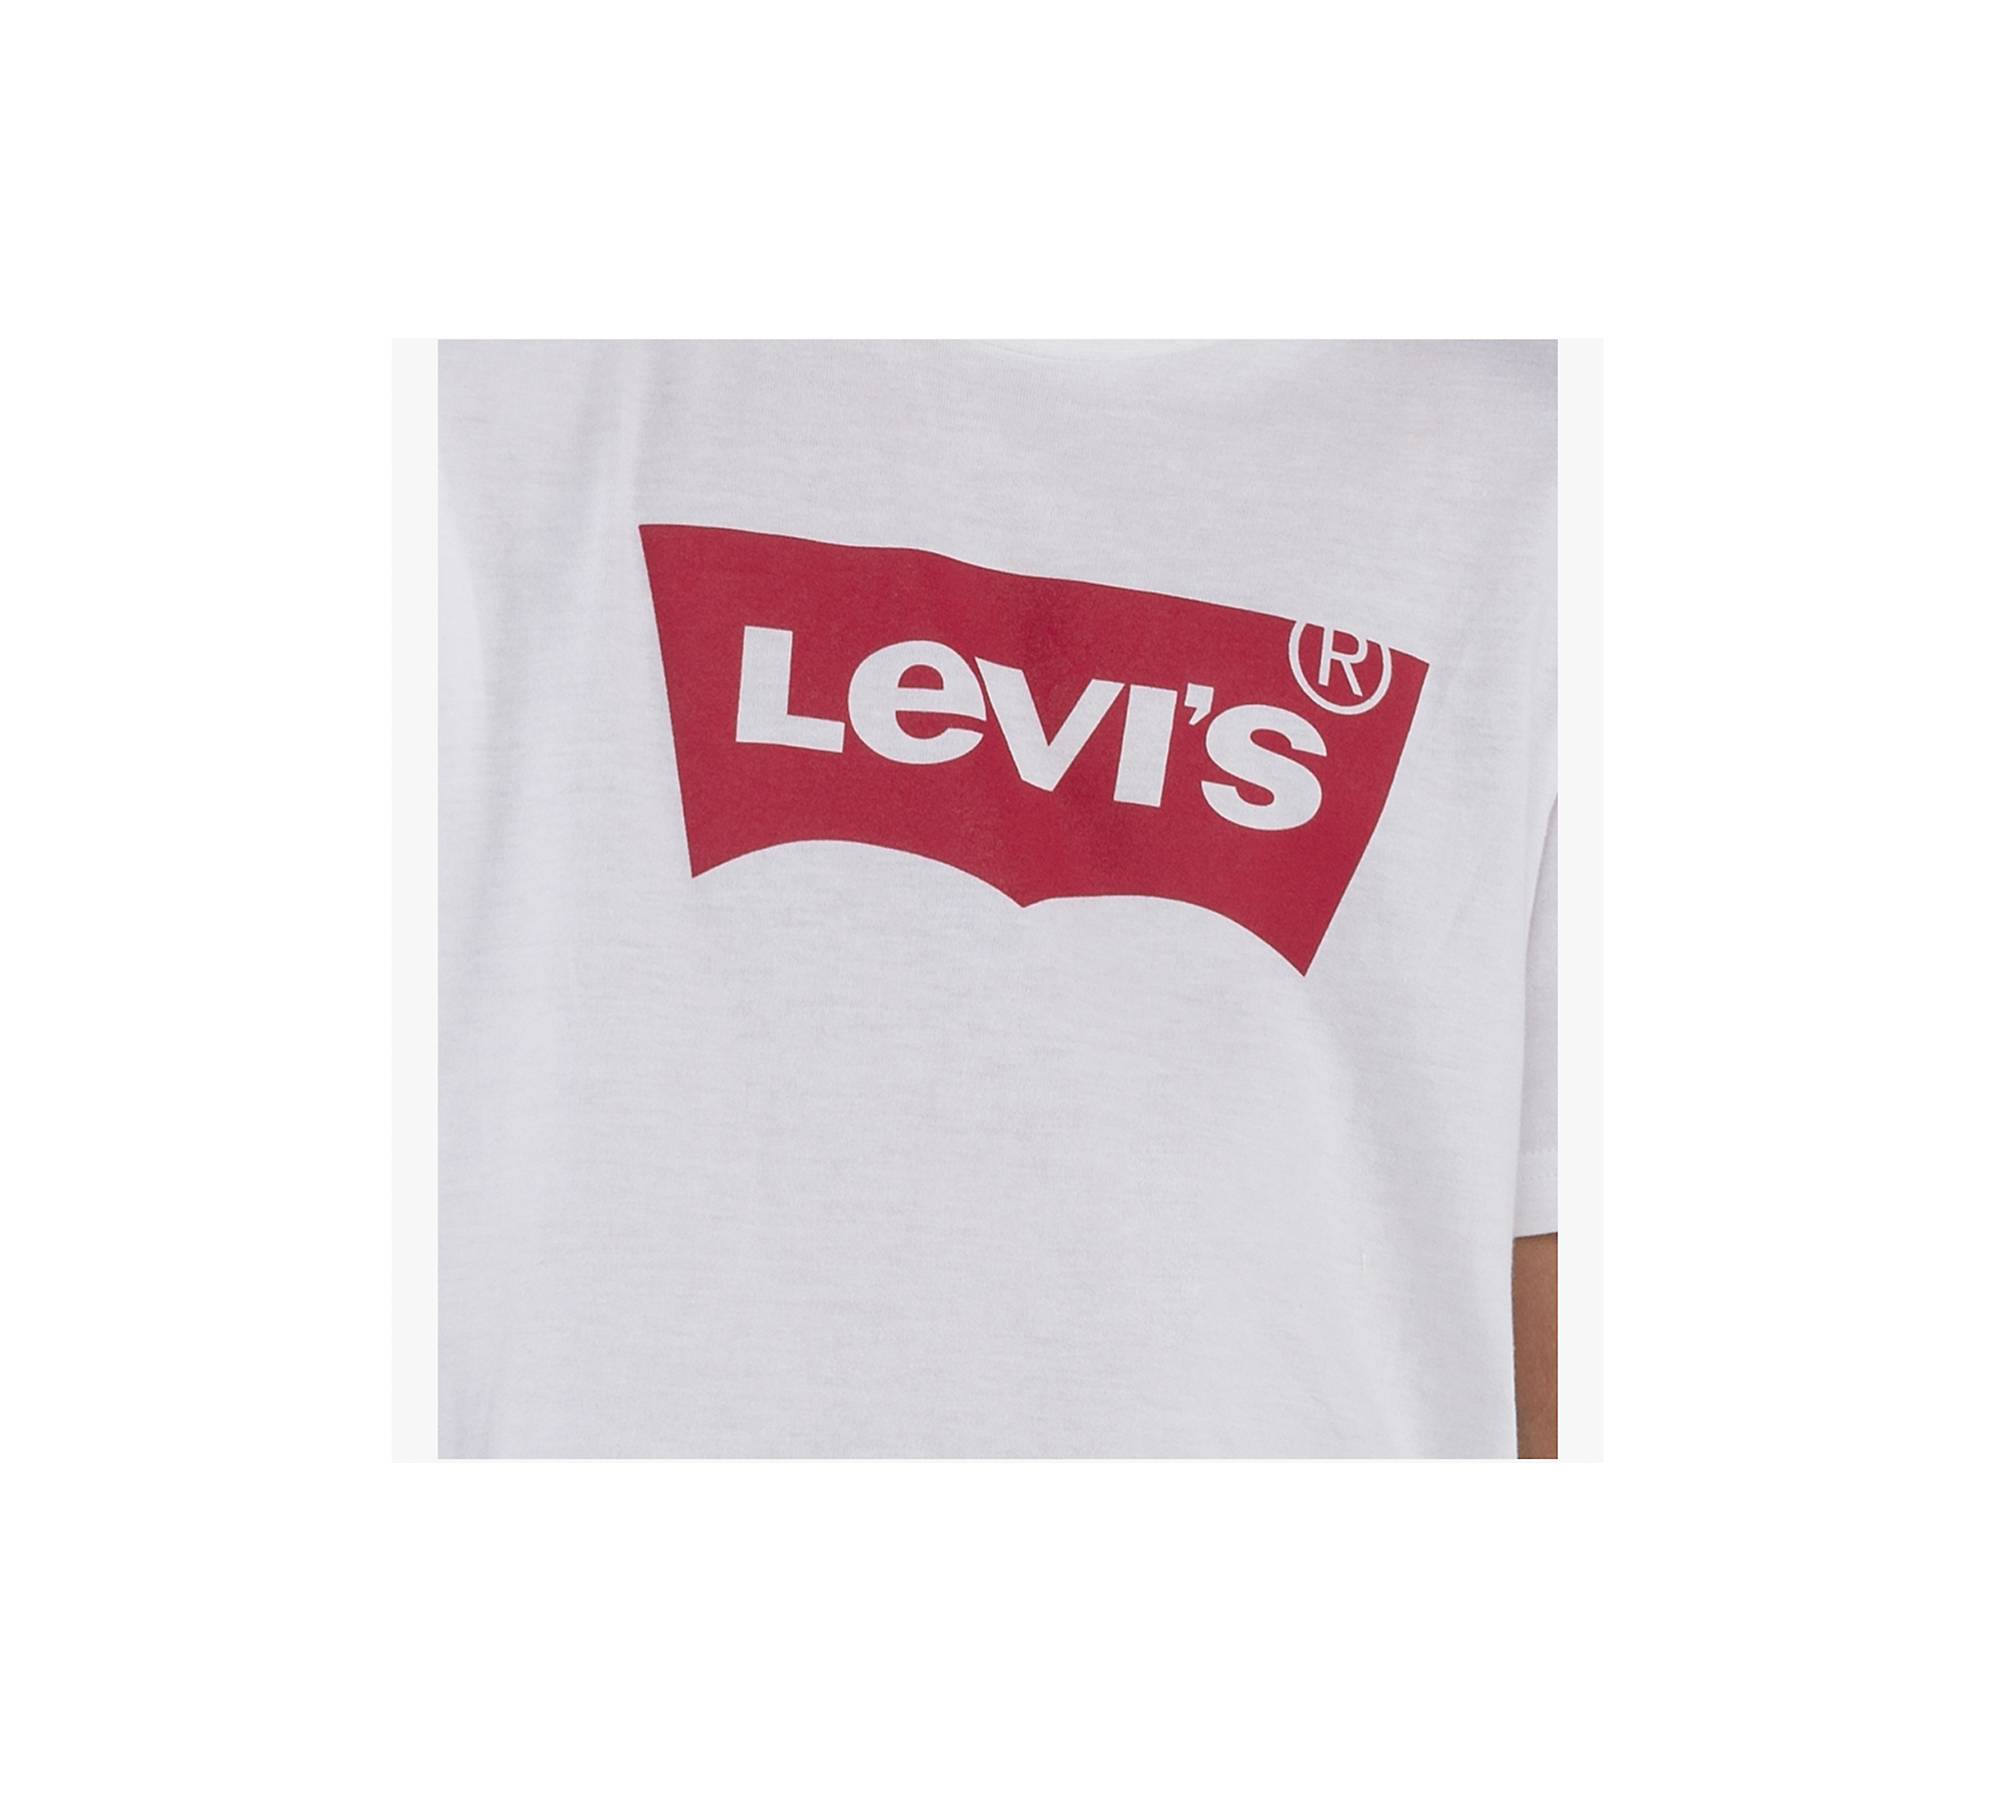 New Boys Levi's 3 Pack Tee Shirts Youth Large 14 - 16 White Blue